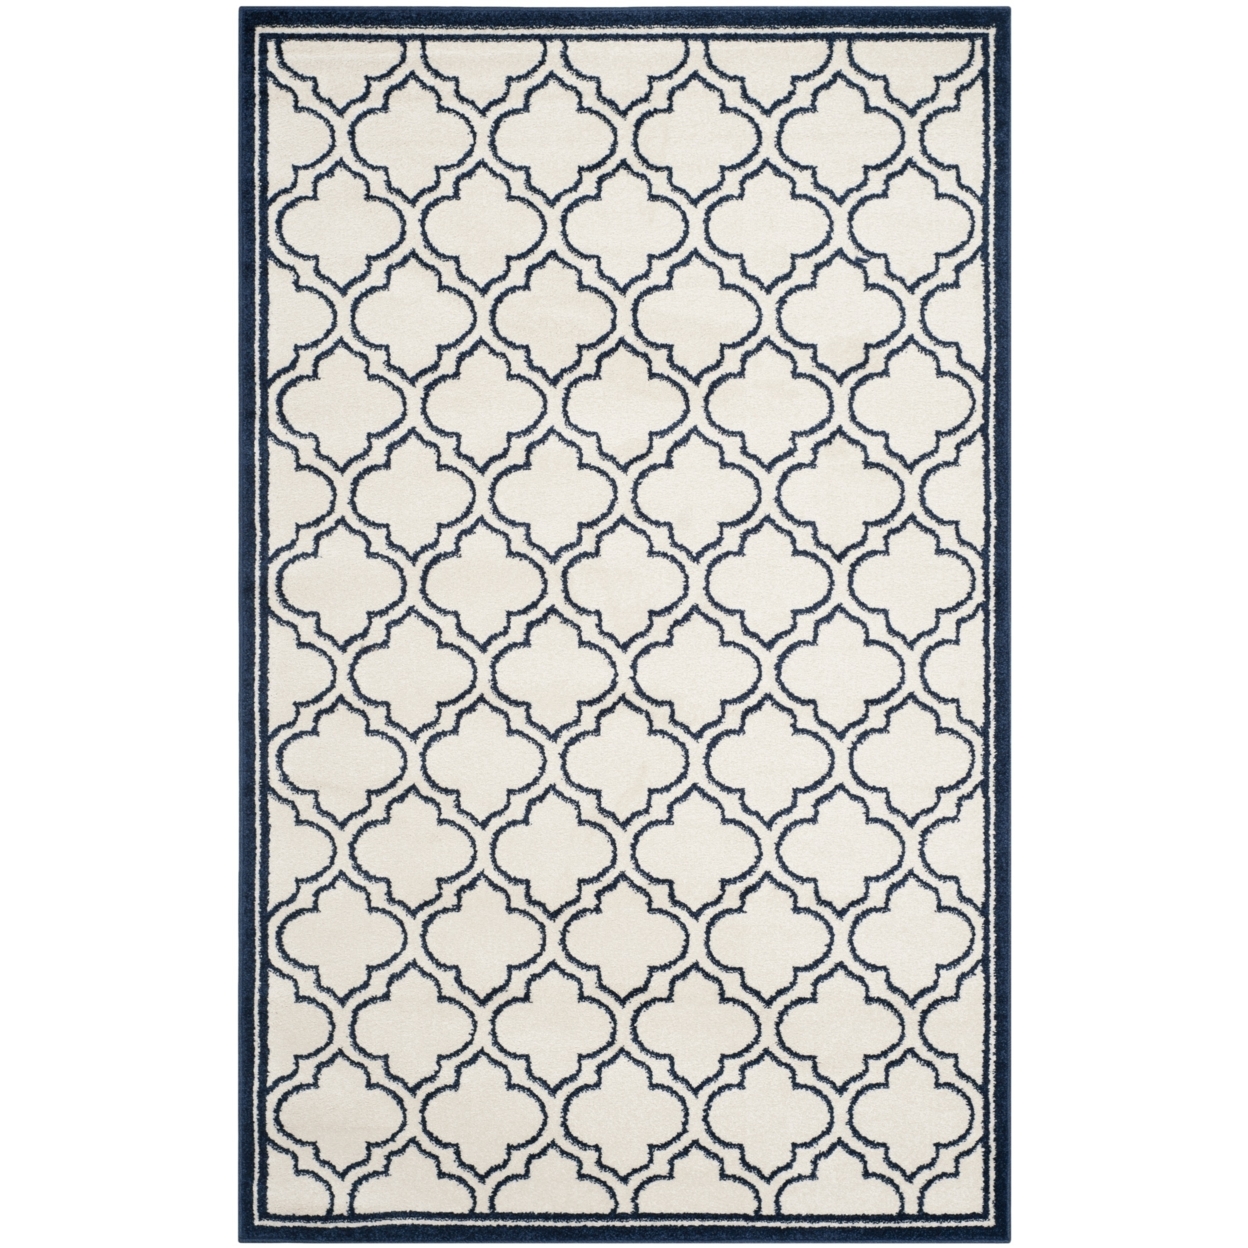 SAFAVIEH Amherst Collection AMT412M Ivory / Navy Rug - 5' X 8'